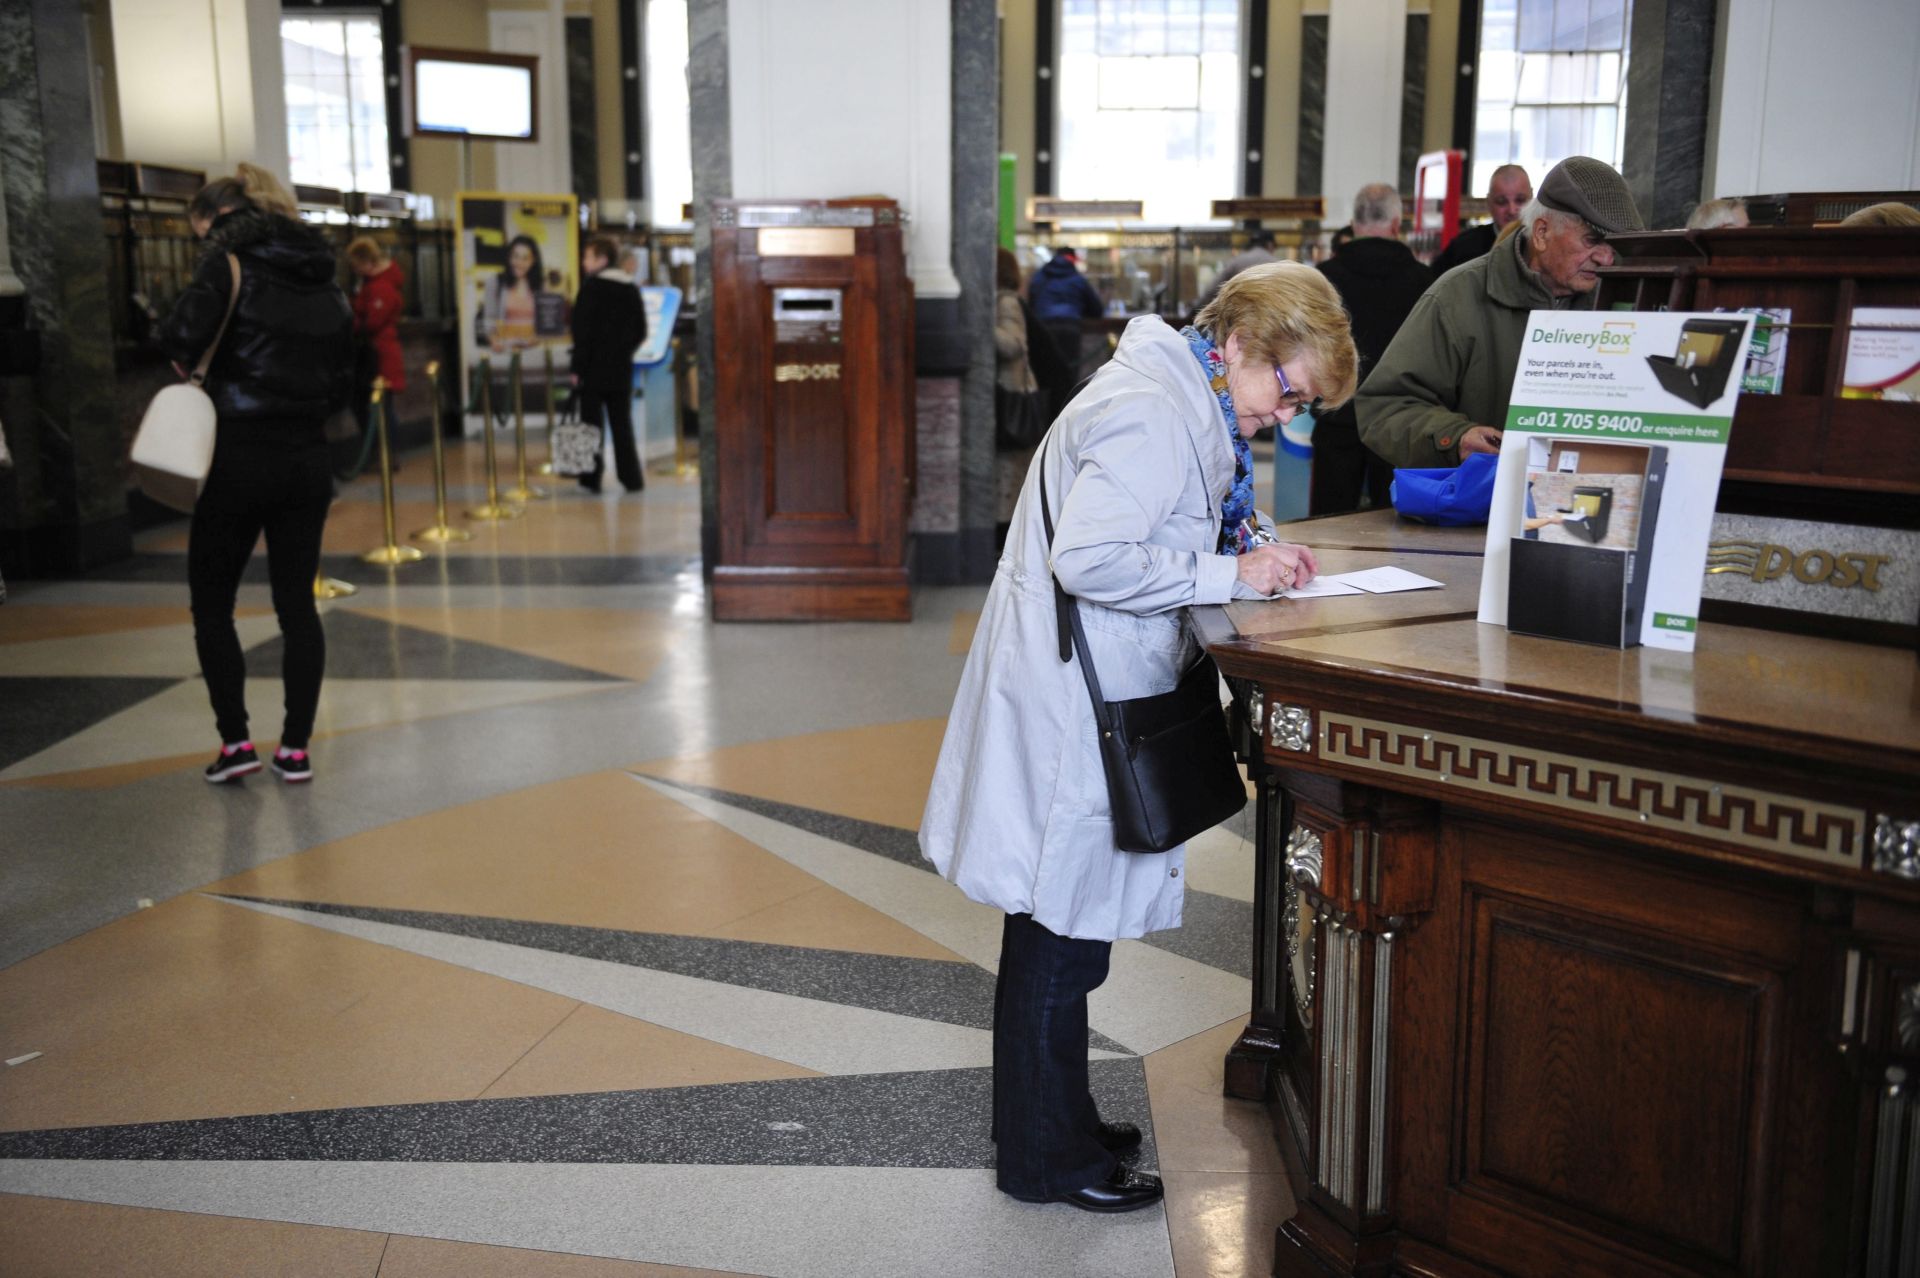 epa05228769 Customers pictured in the GPO (General Post Office) on Dublin’s O’Connell Street, headquaters of the 1916 rising in Dublin, Ireland, 24 March 2016. Ireland will commemorate the 100 anniversay of the 1916 Easter Rising this Sunday 27 March 2016.  EPA/AIDAN CRAWLEY